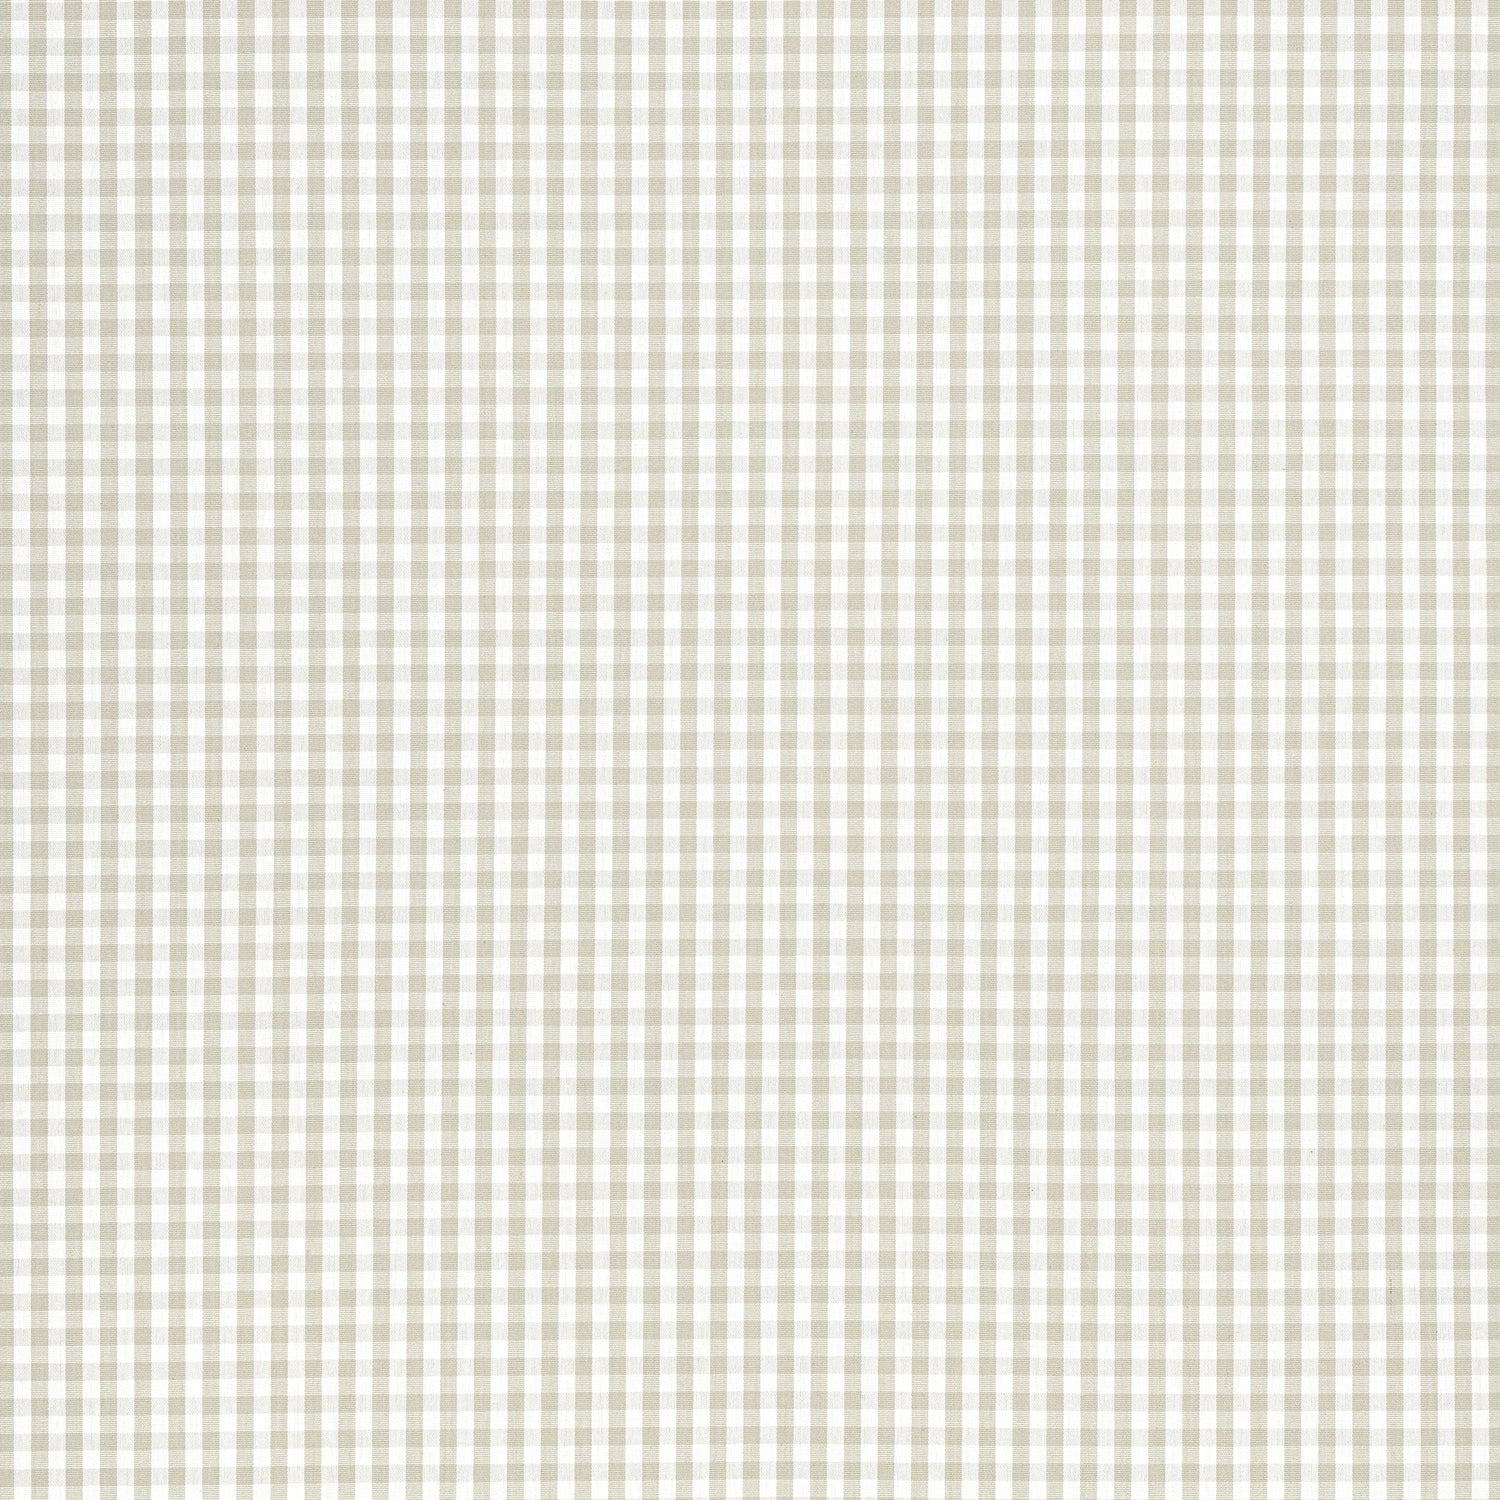 Leighton Check fabric in Linen color - pattern number AW24514 - by Anna French in the Devon collection